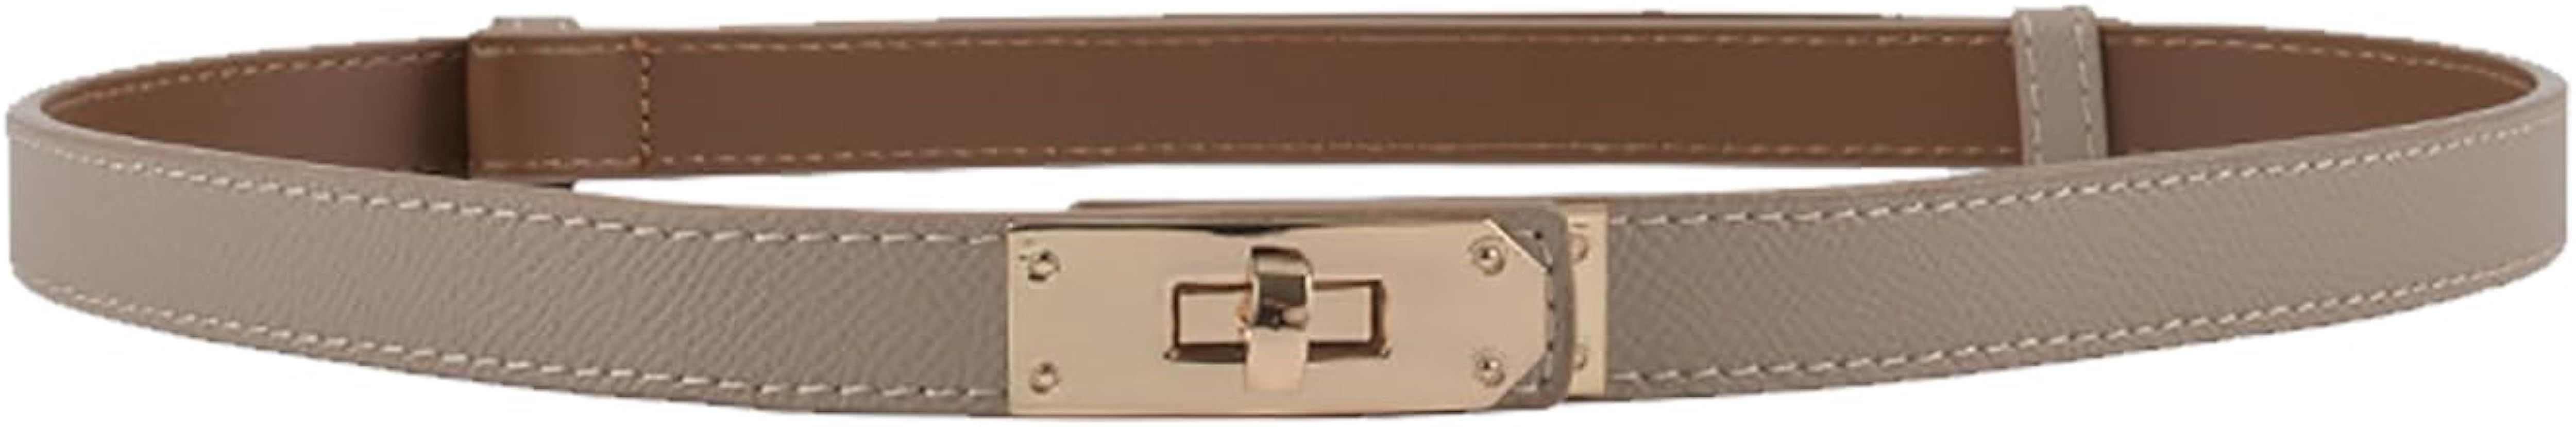 Women's Skinny Leather Belt with Adjustable Silver Turn-Lock Buckle - Ideal for Dresses, Jeans, a... | Amazon (US)